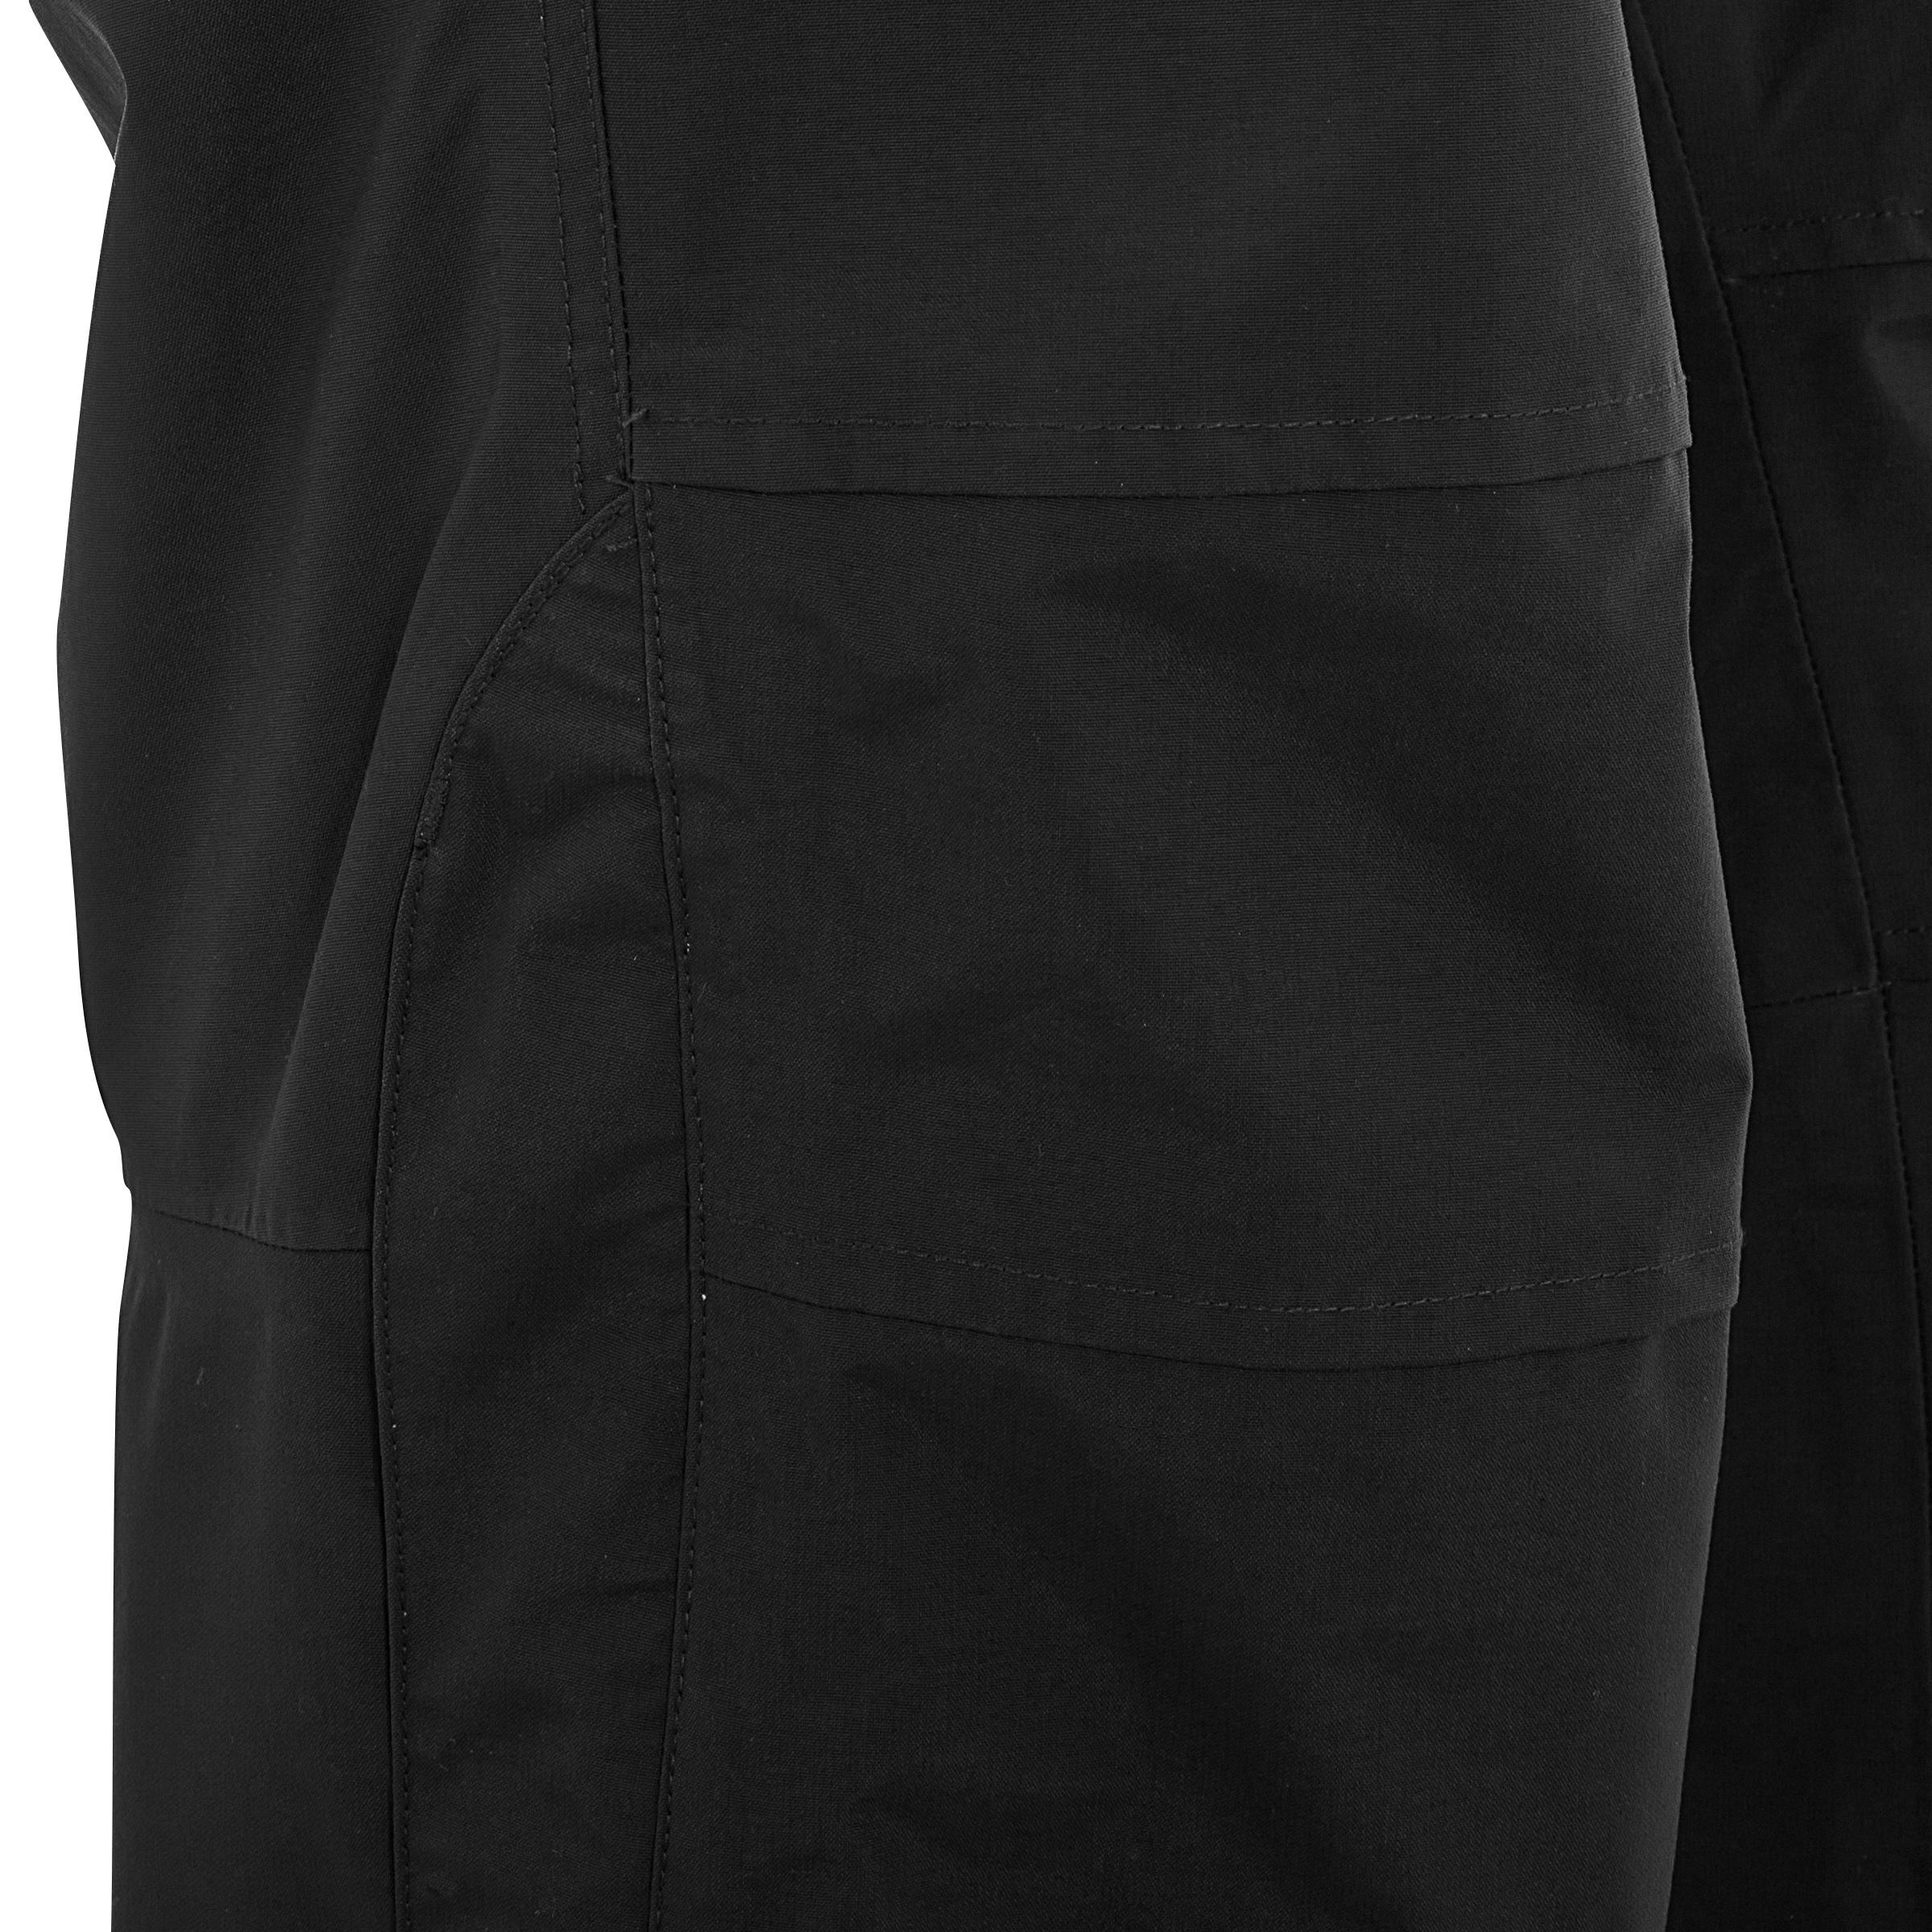 500 Adult 2-in1 Waterproof Horse Riding Overtrousers - Black 11/14